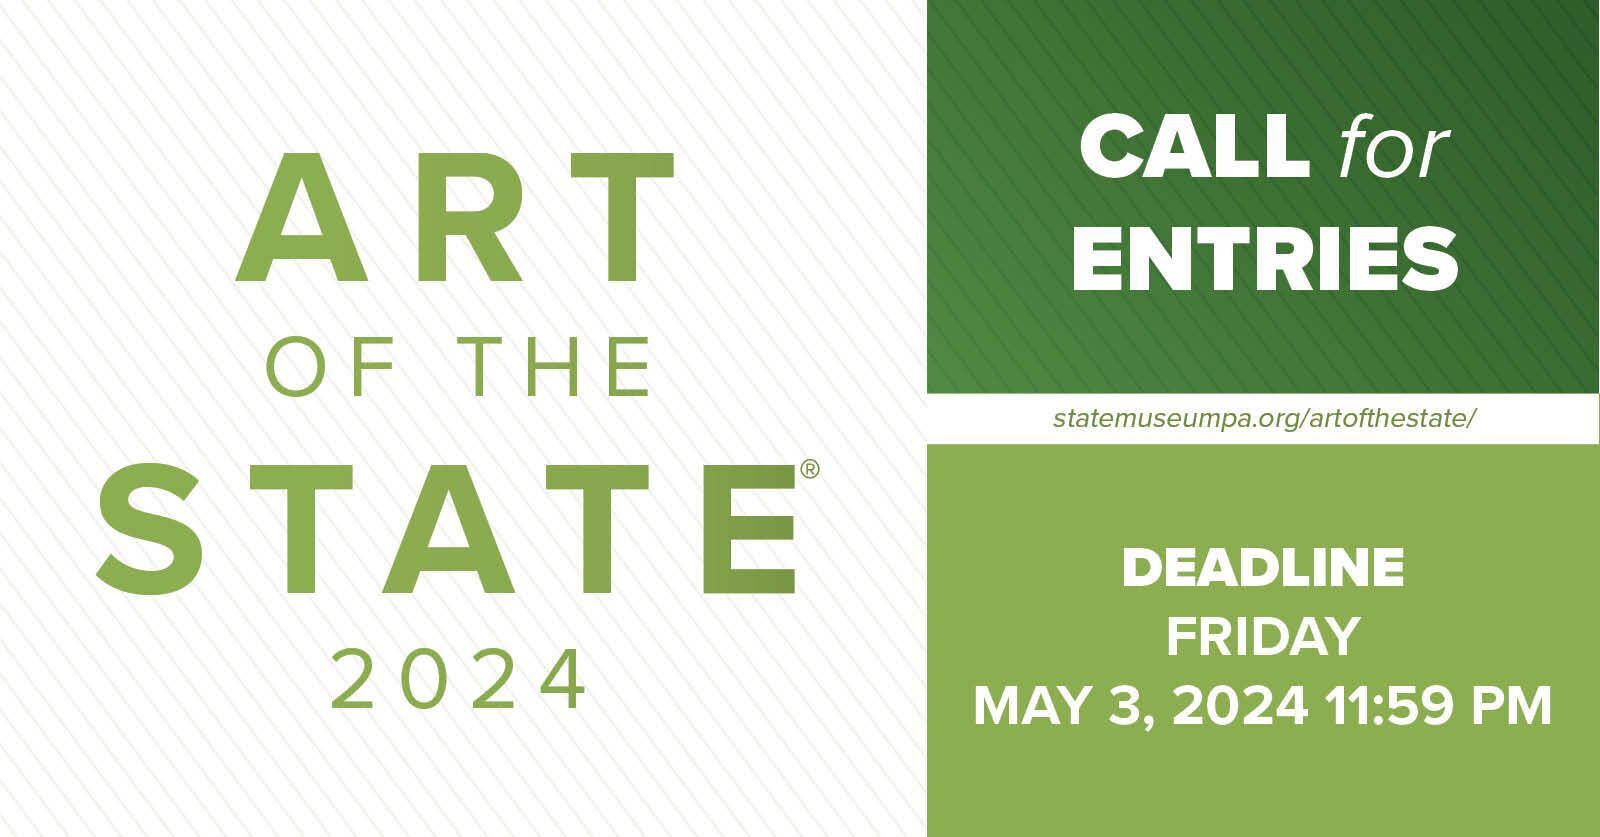 Art of the State 2024 Call for Entries